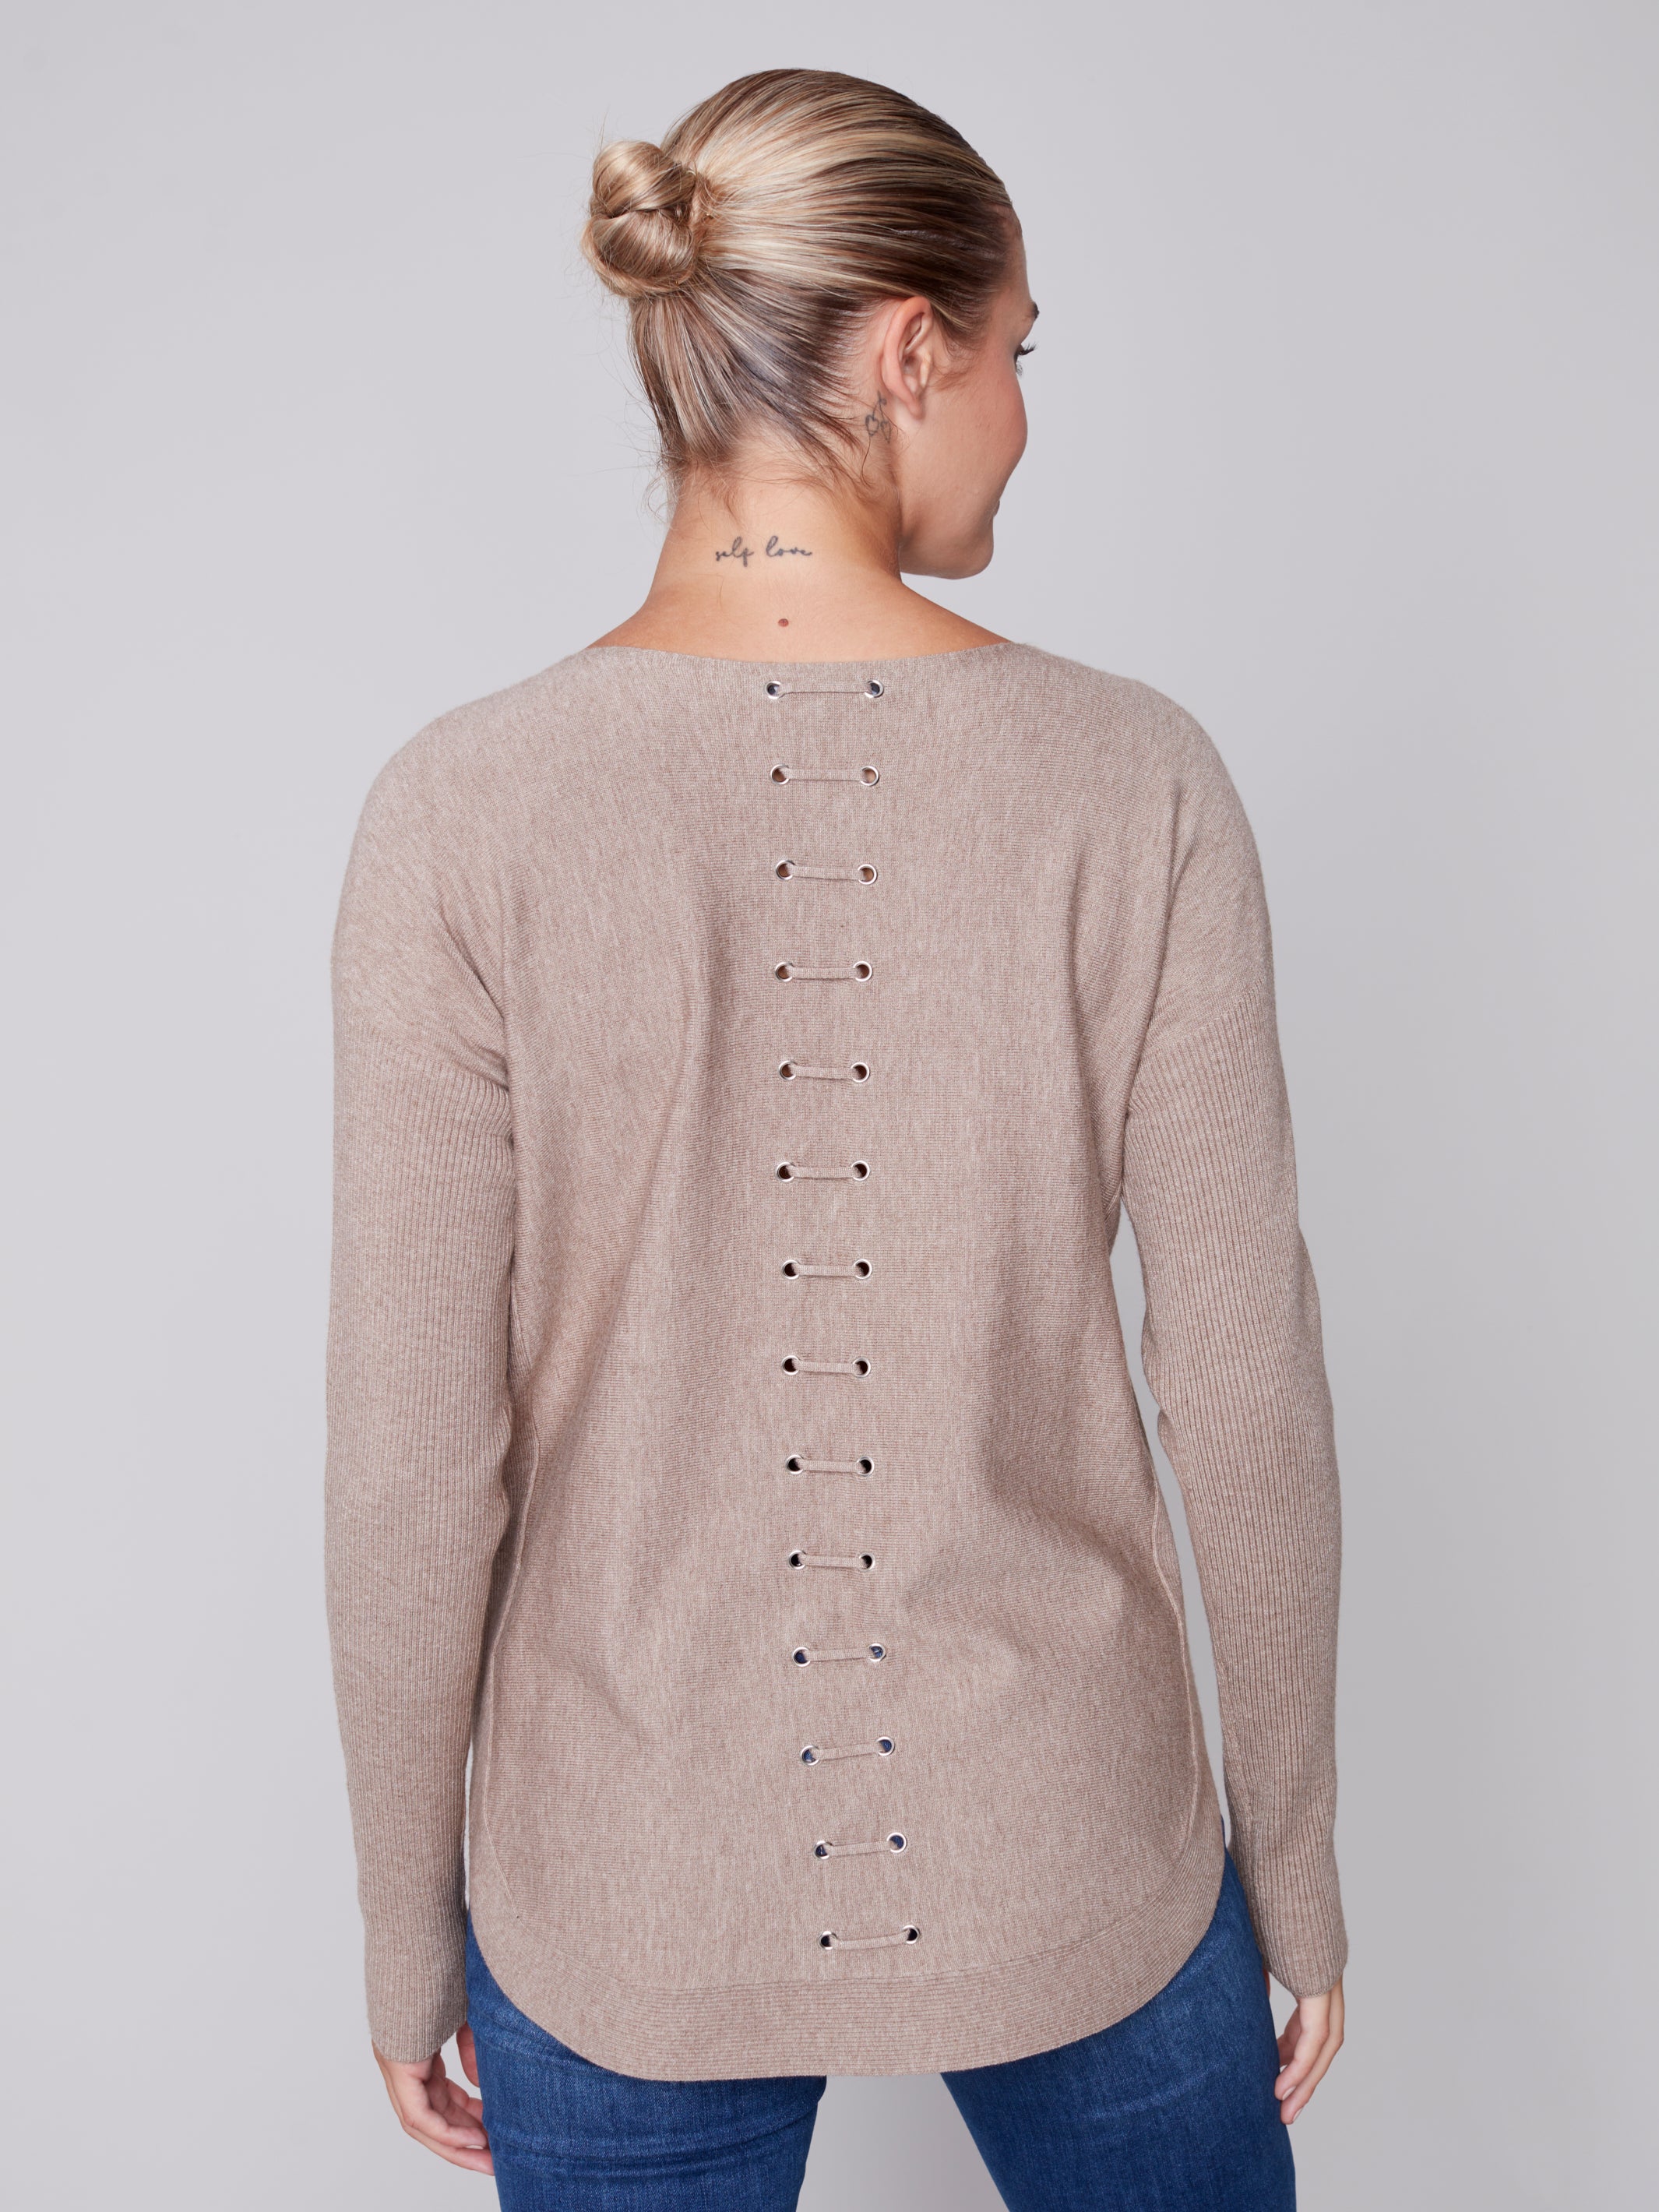 Sweater With Back Eyelit Detail C2170Y/464A